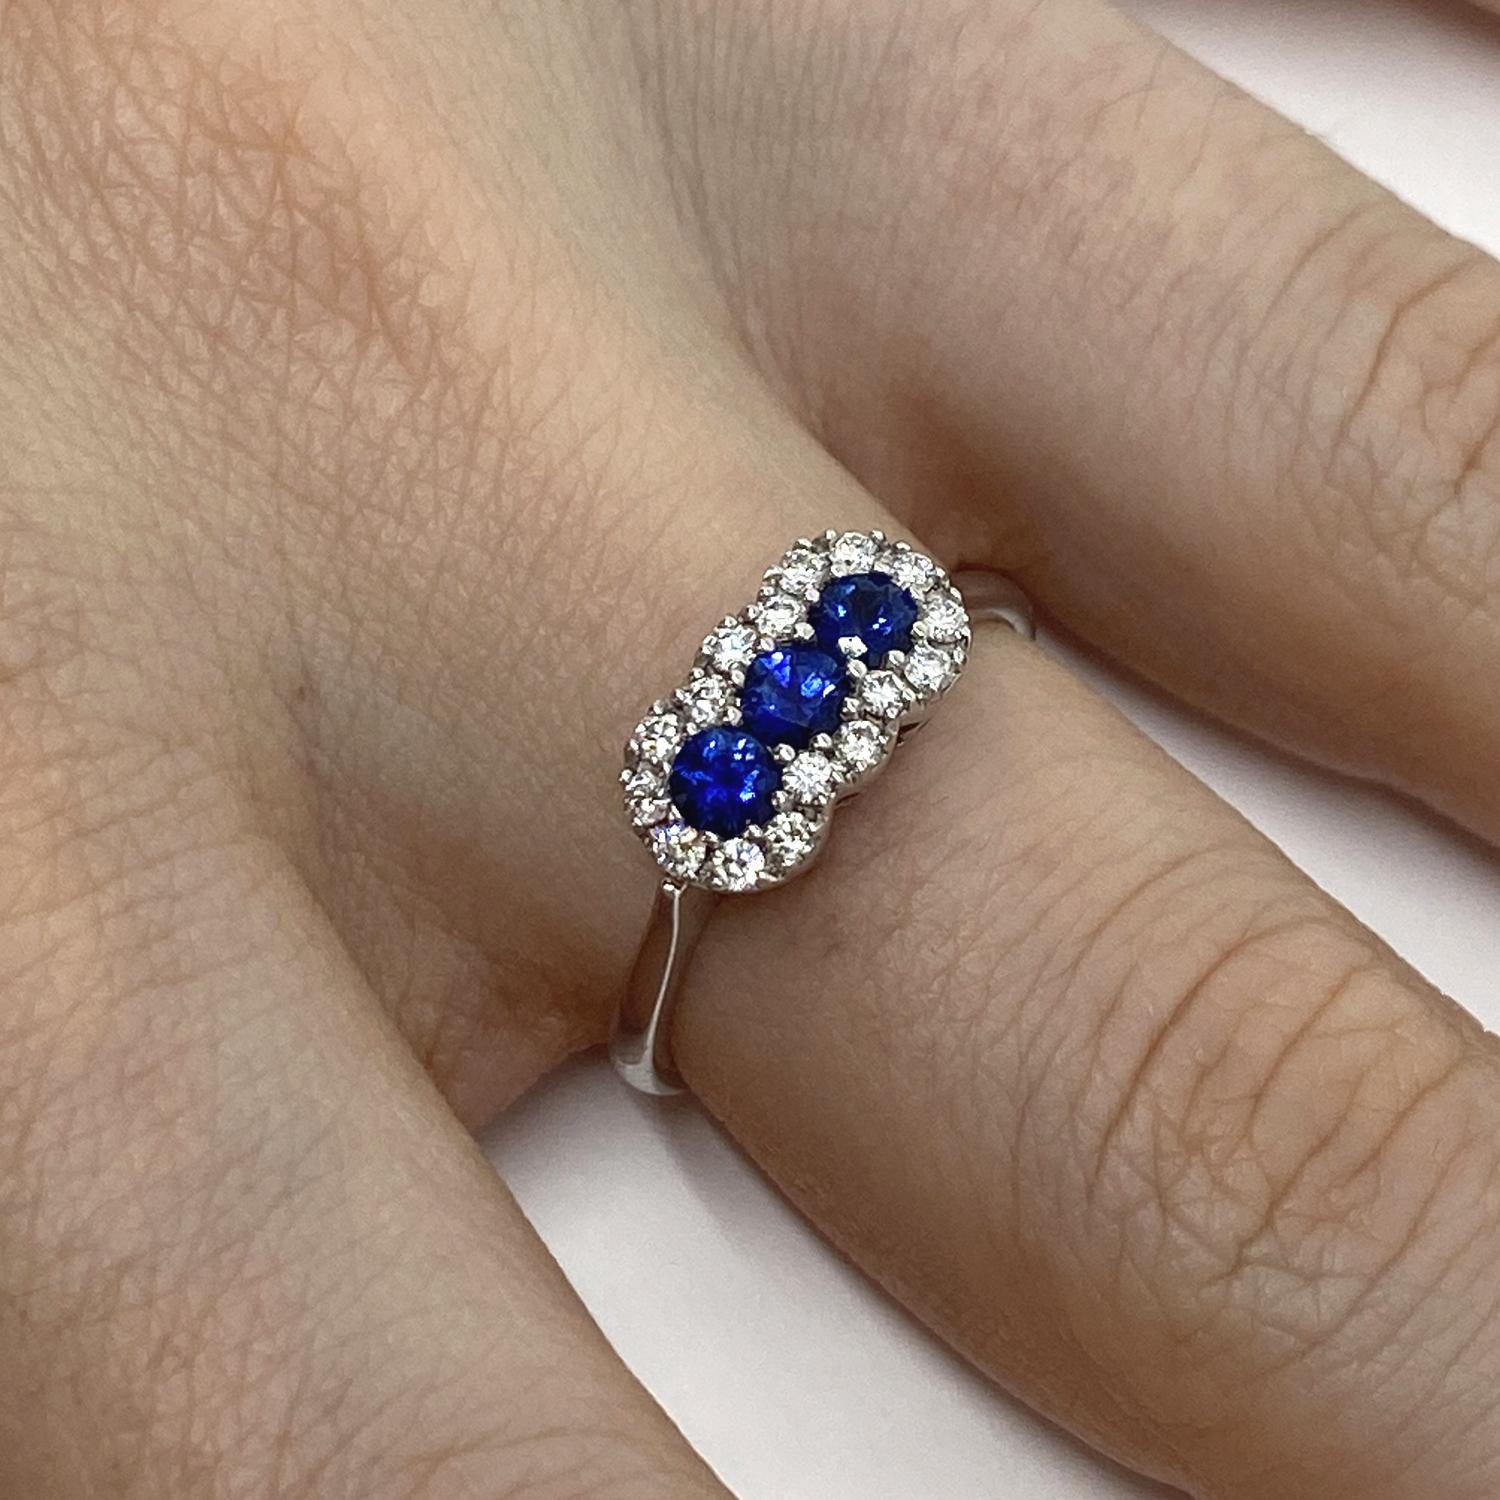 Ring made of 18kt white gold with three natural brilliant-cut blue sapphires for ct.0.45 and brilliant-cut white natural diamonds outline for ct.0.24

Welcome to our jewelry collection, where every piece tells a story of timeless elegance and